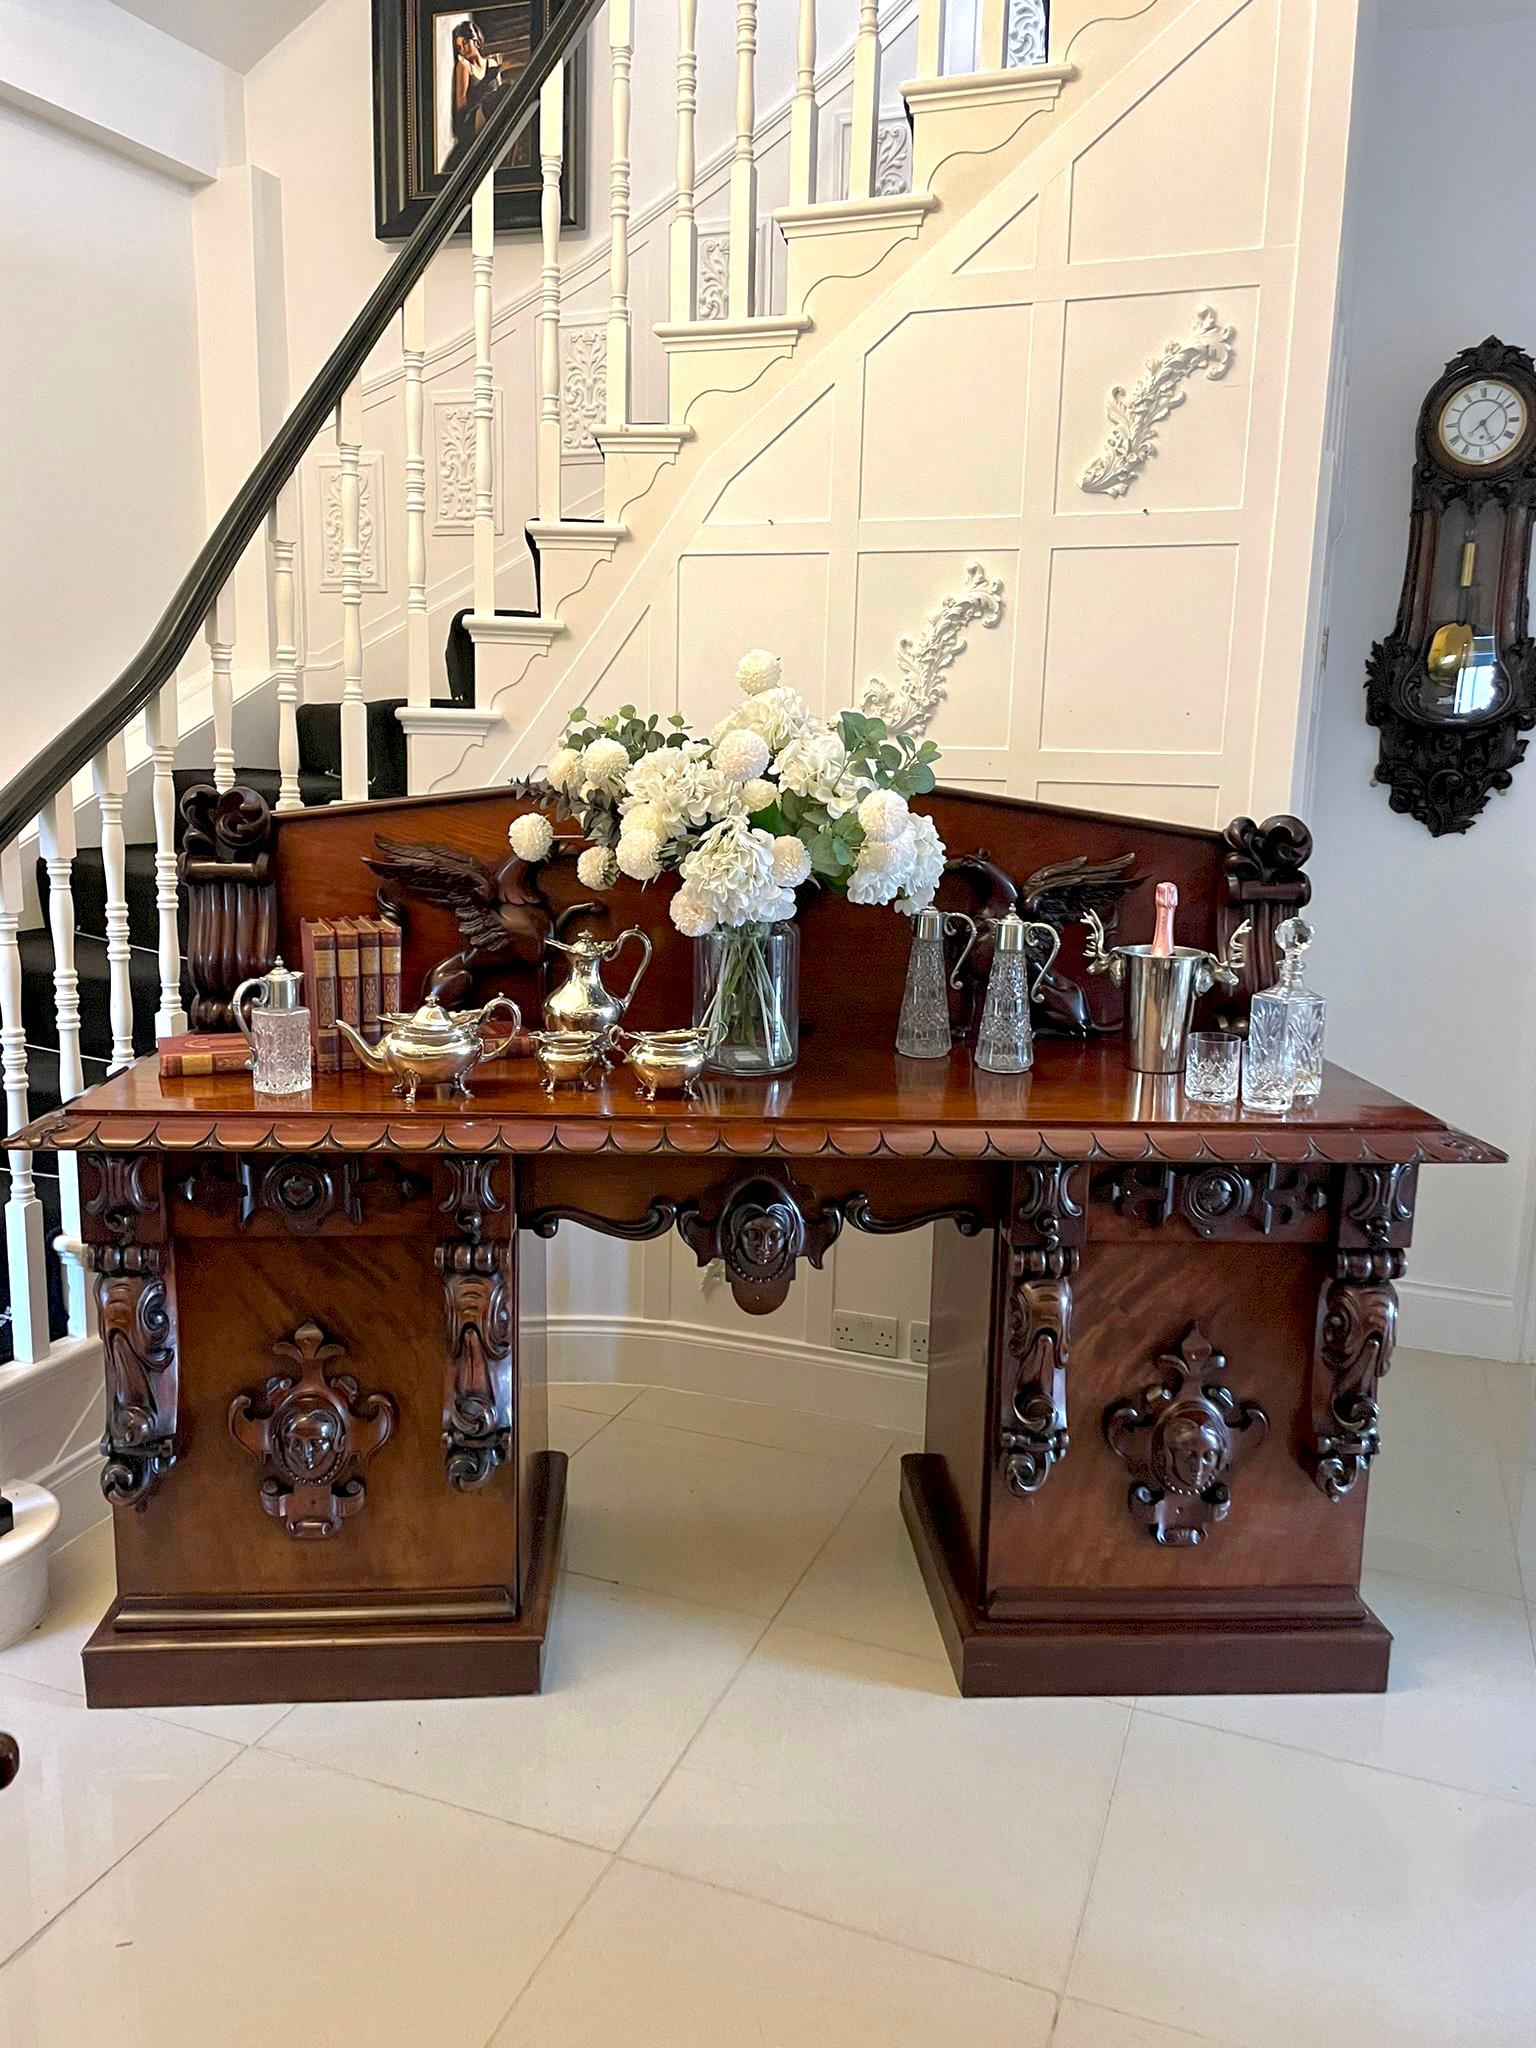 Magnificent quality antique William IV carved mahogany sideboard having an incredible pair of high-relief exceptionally detailed carved griffons flanking a central flaming urn. The base having an outstanding mahogany top with an exquisite carved